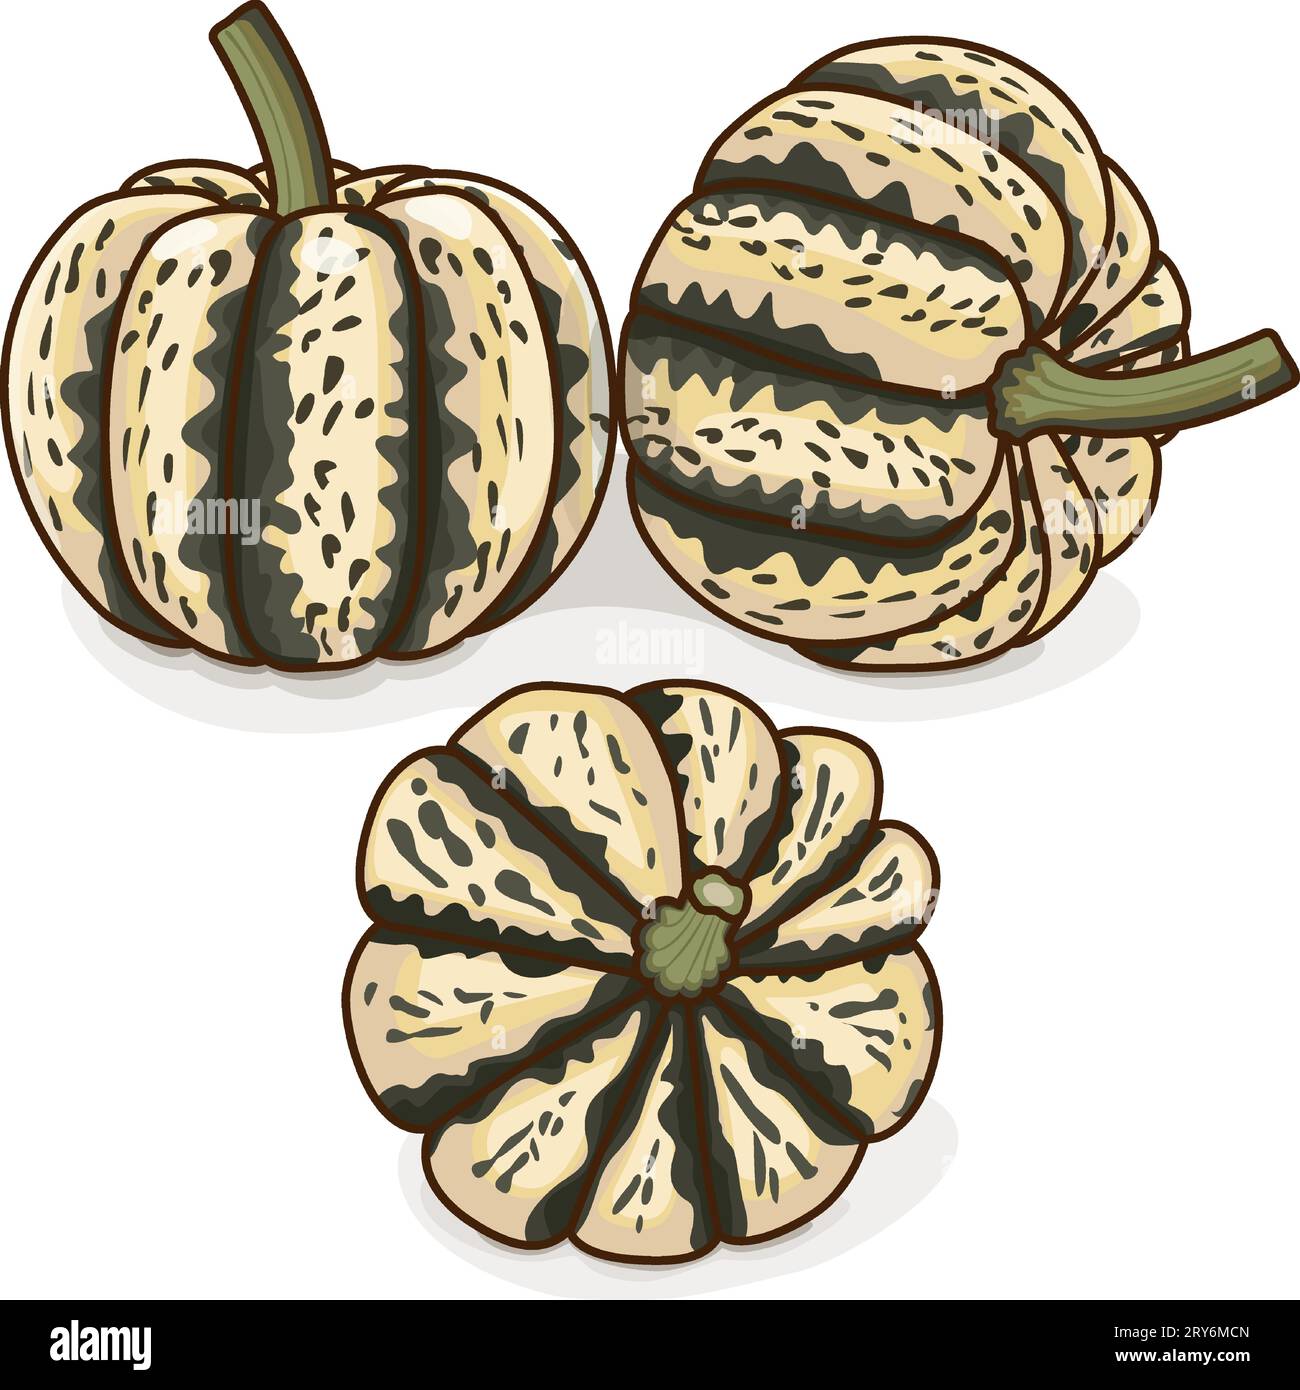 Group of Sweet Dumpling squash. Winter squash. Cucurbita pepo. Fresh, organic, raw fruits and vegetables. Clipart. Isolated vector illustration. Stock Vector